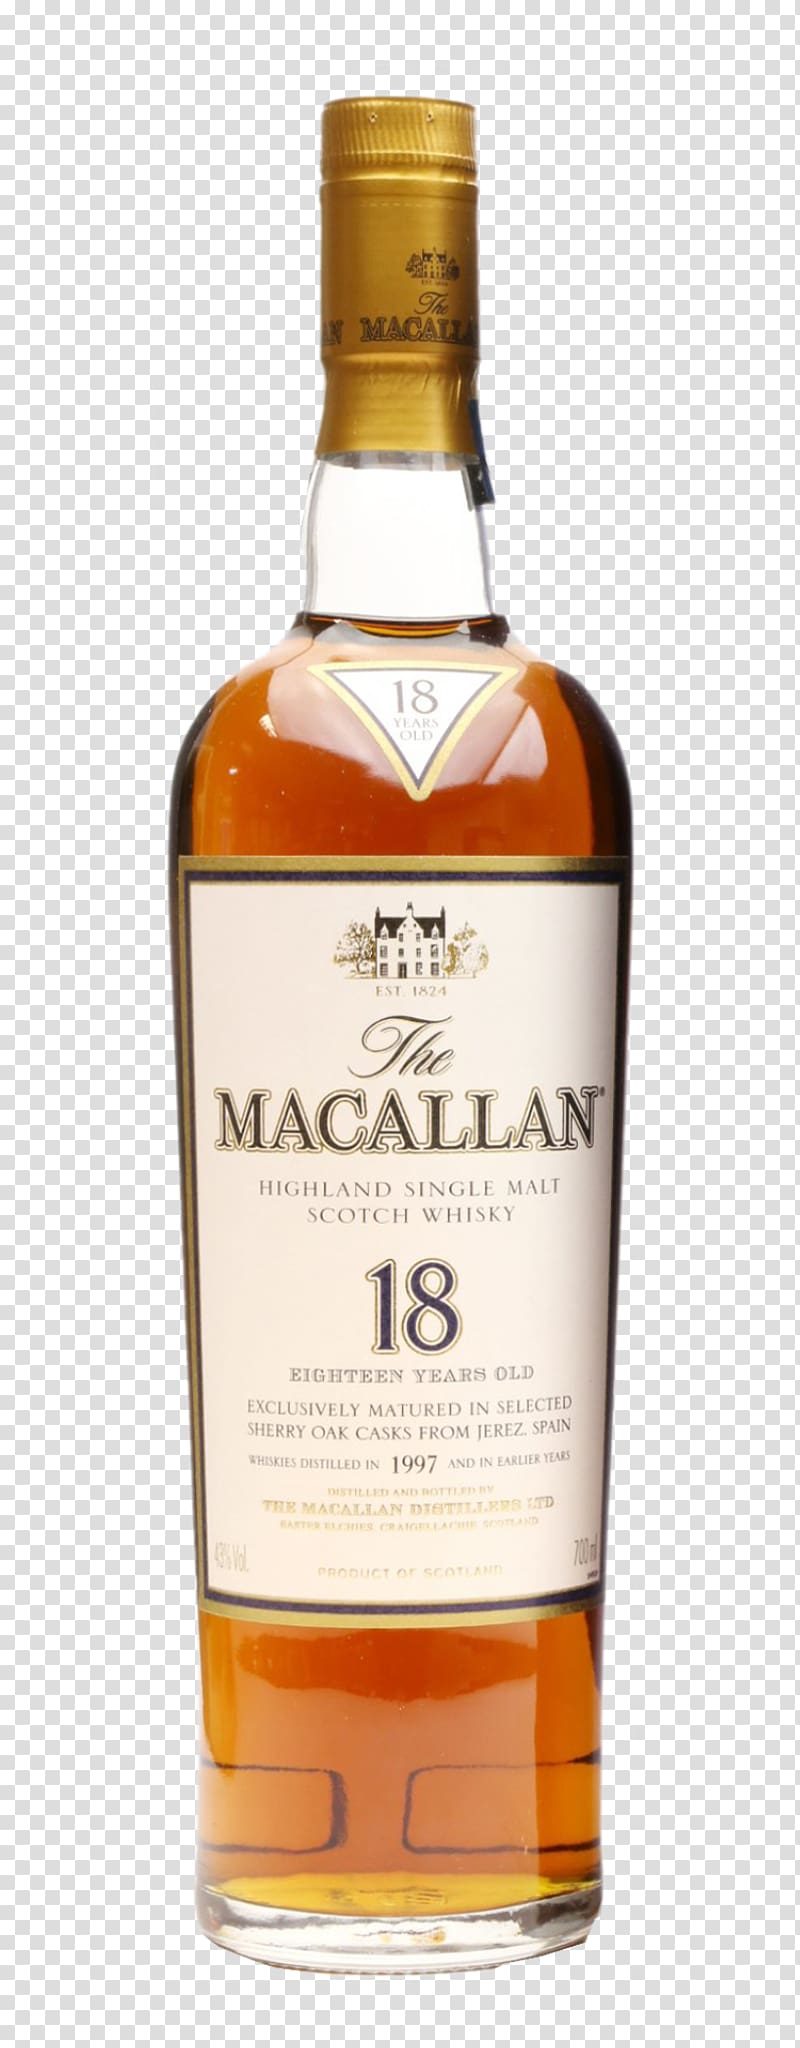 Scotch whisky The Macallan distillery Whiskey Distilled beverage Cutty Sark, 18 years old transparent background PNG clipart